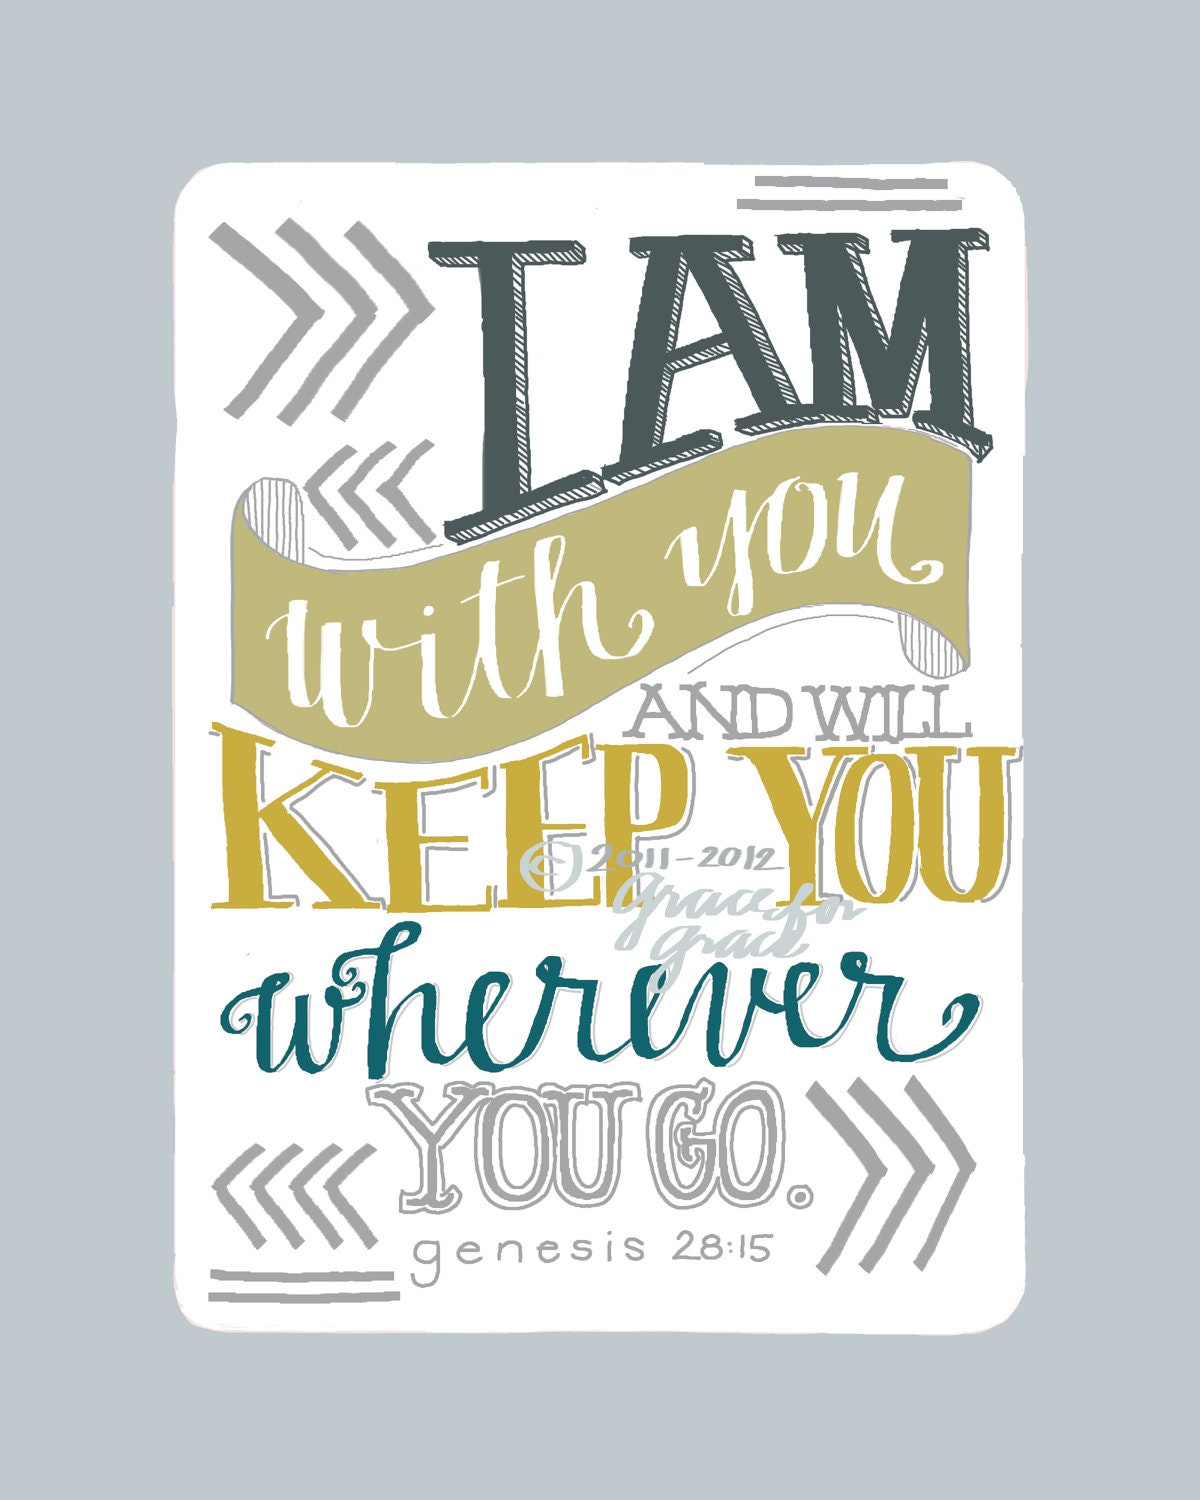 Christian Art - I Am With You and Will Keep You - 5x7 Giclee Print - Scripture Art, Hand Typography, Bible Verse Art, Blue, Mustard